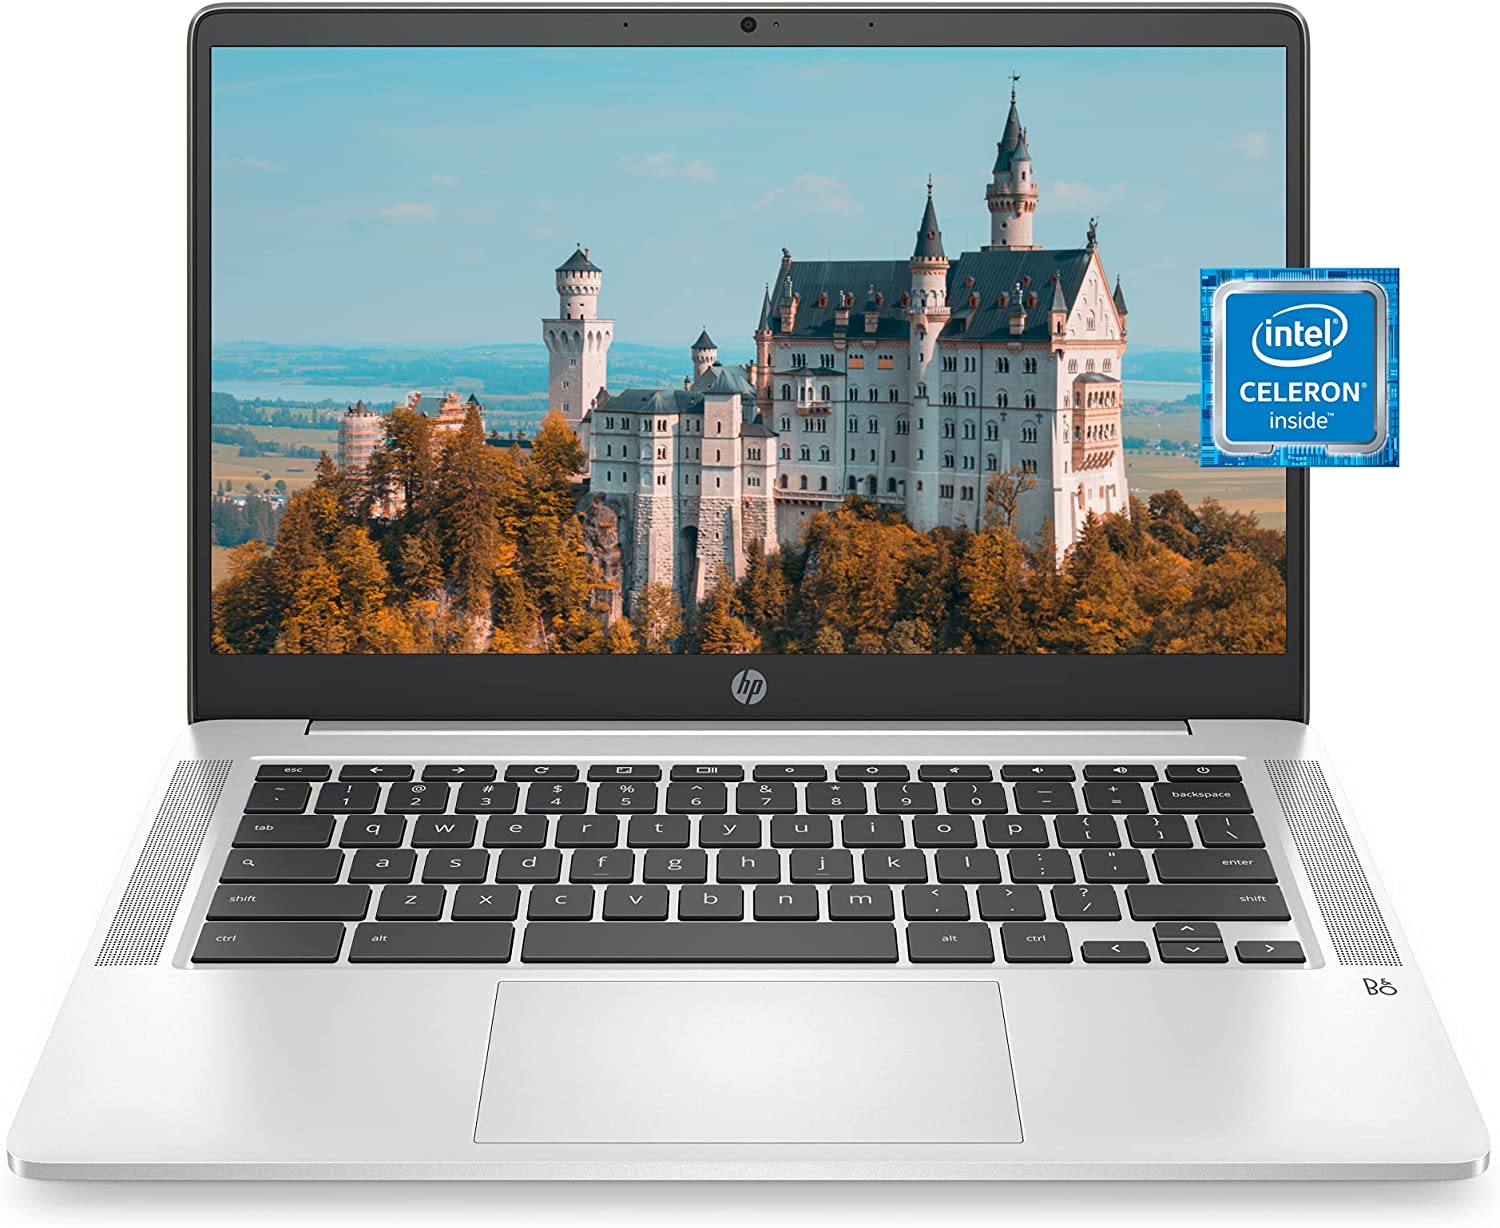 10 Best 14 Inch Laptop Under 500 In 2023 [Buying Guide]